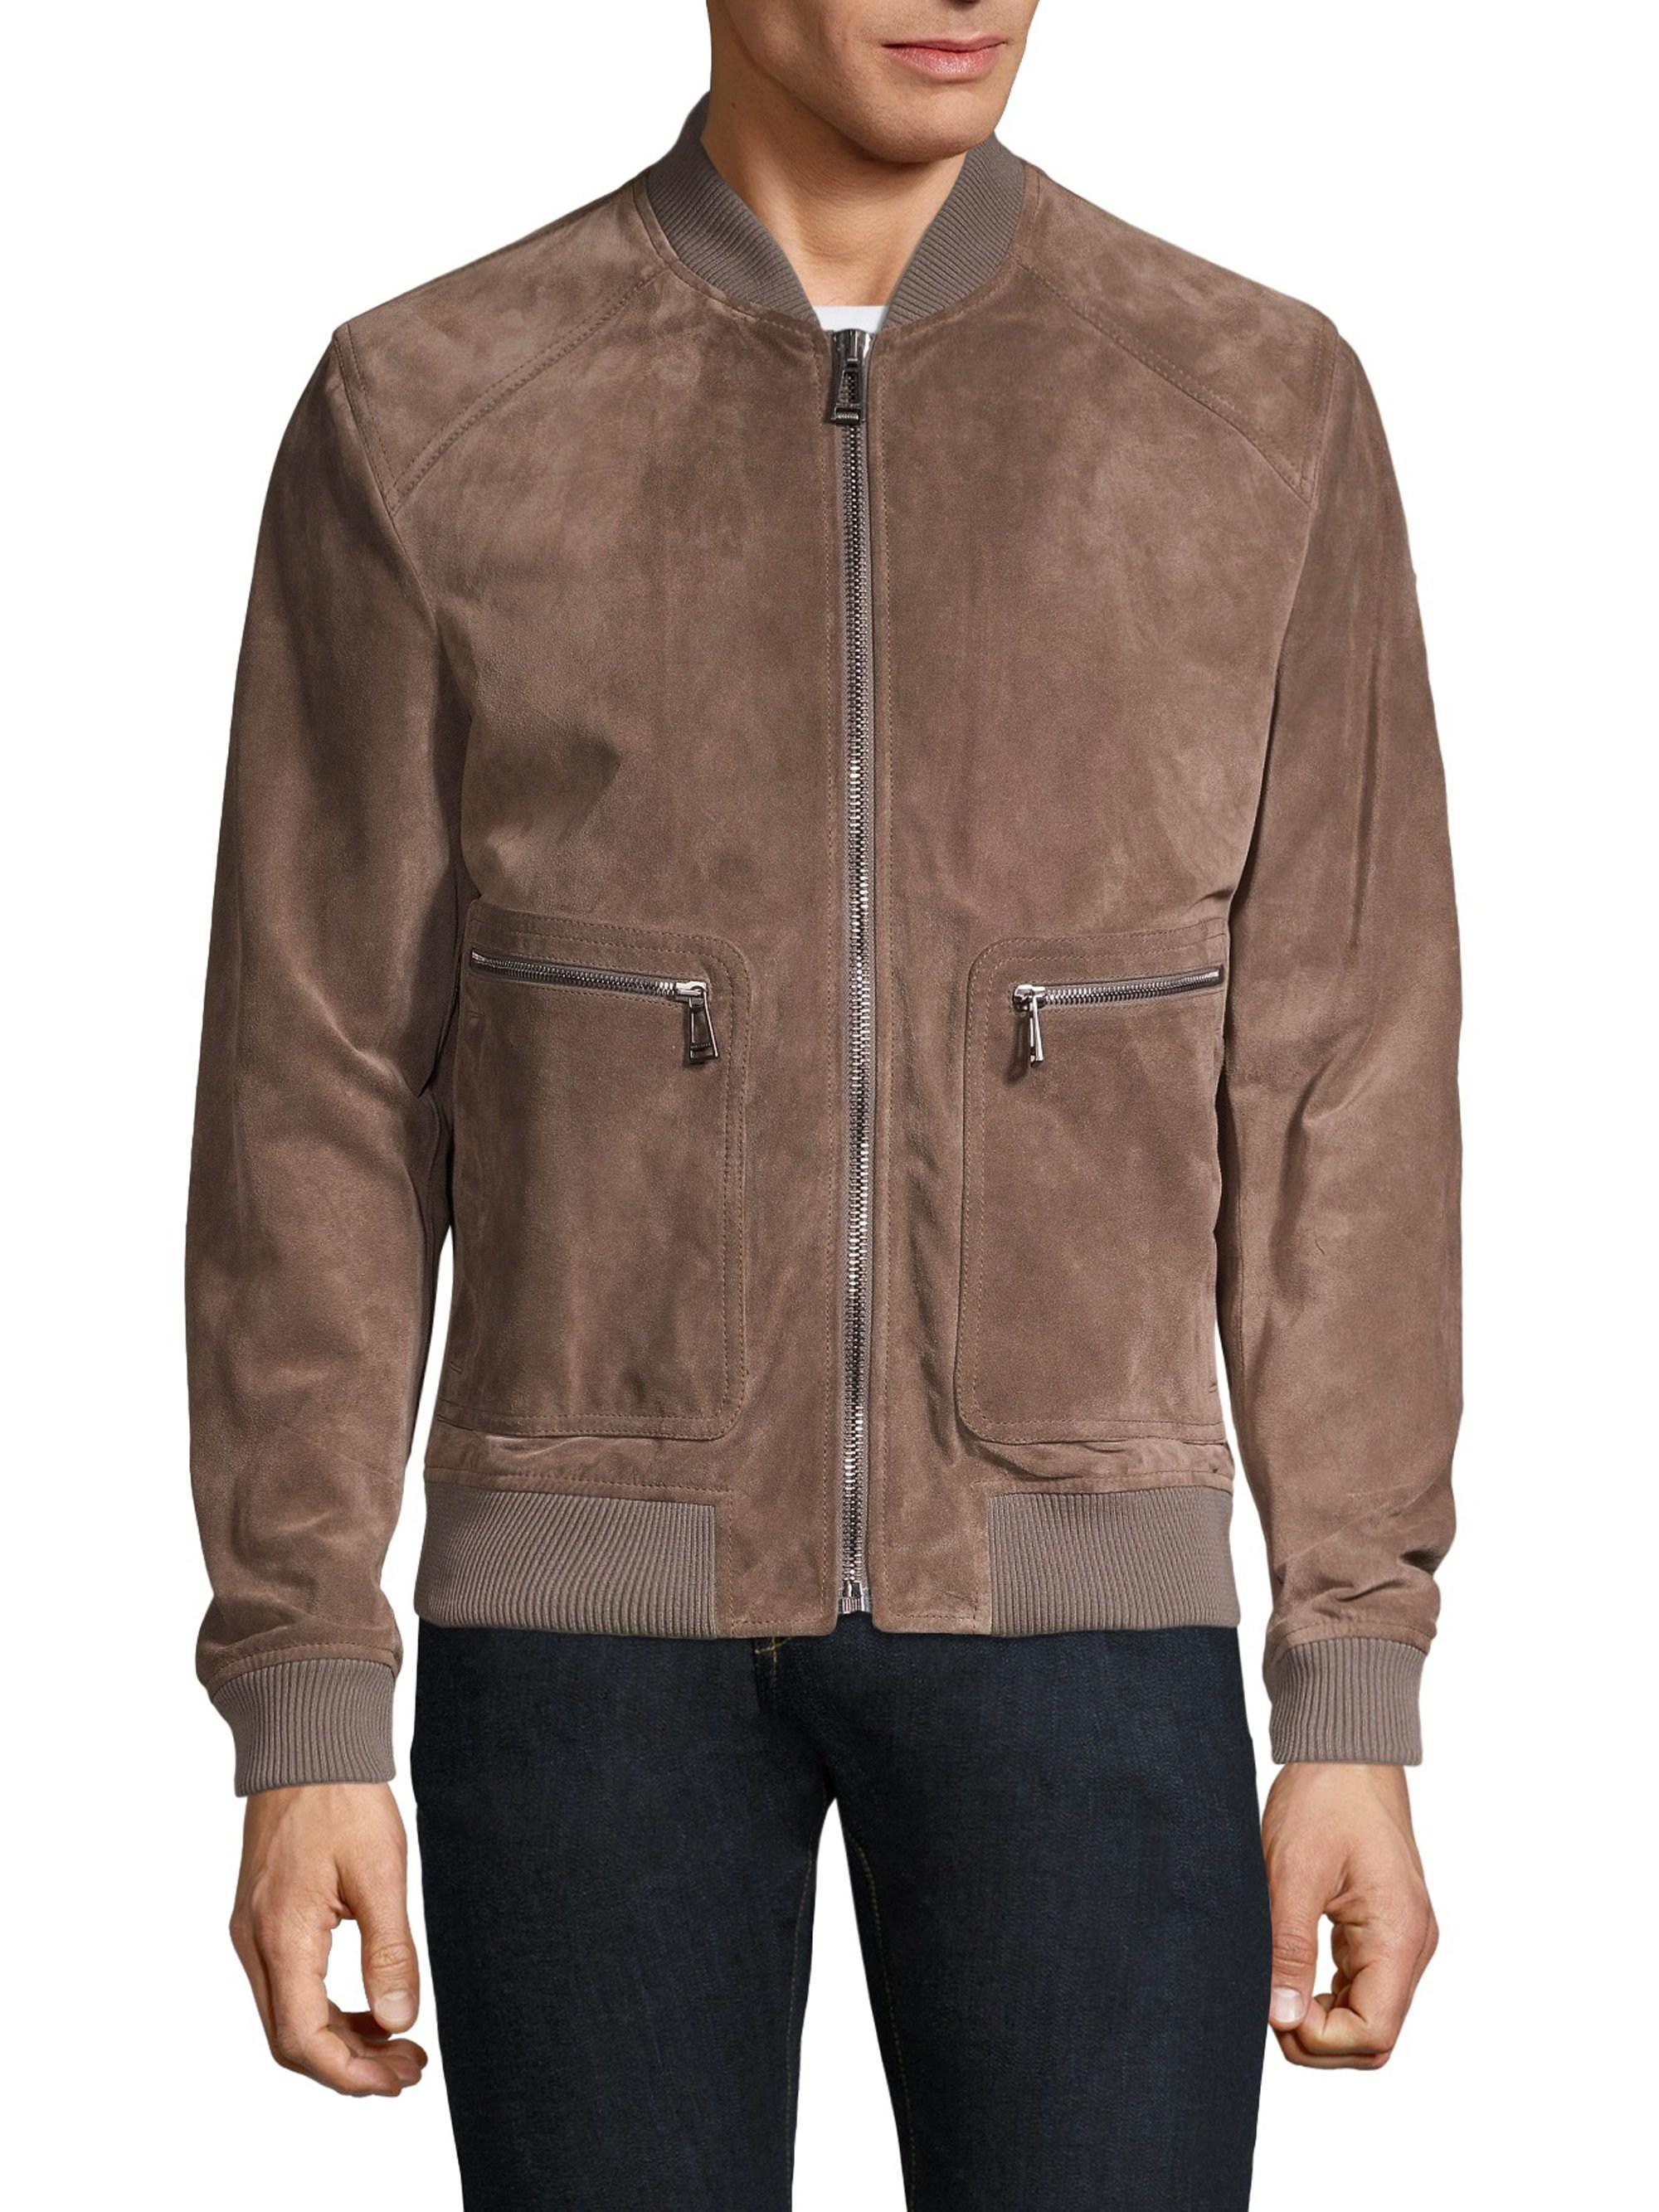 Belstaff Winswell Oiled Suede Bomber Jacket in Brown for Men - Lyst